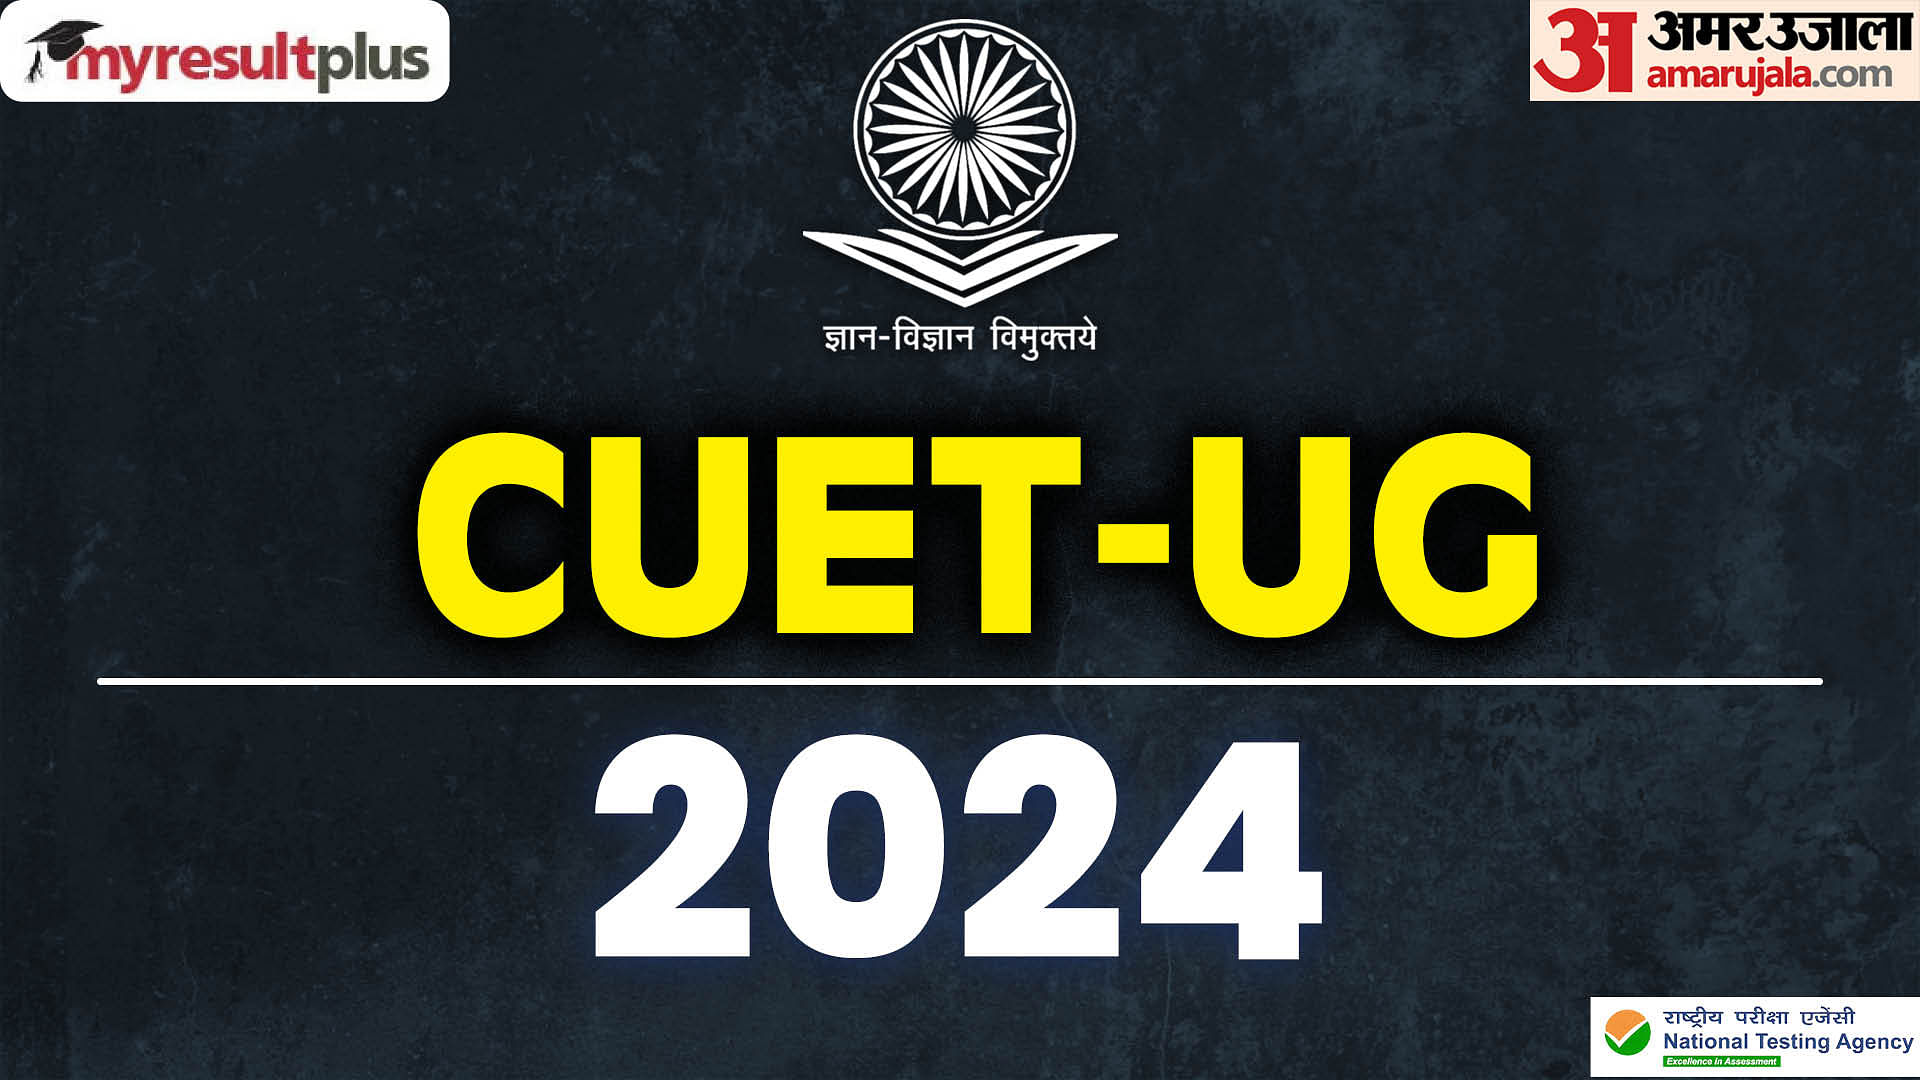 CUET UG Admit Card 2024 soon: Check how to download and list of participating universities here